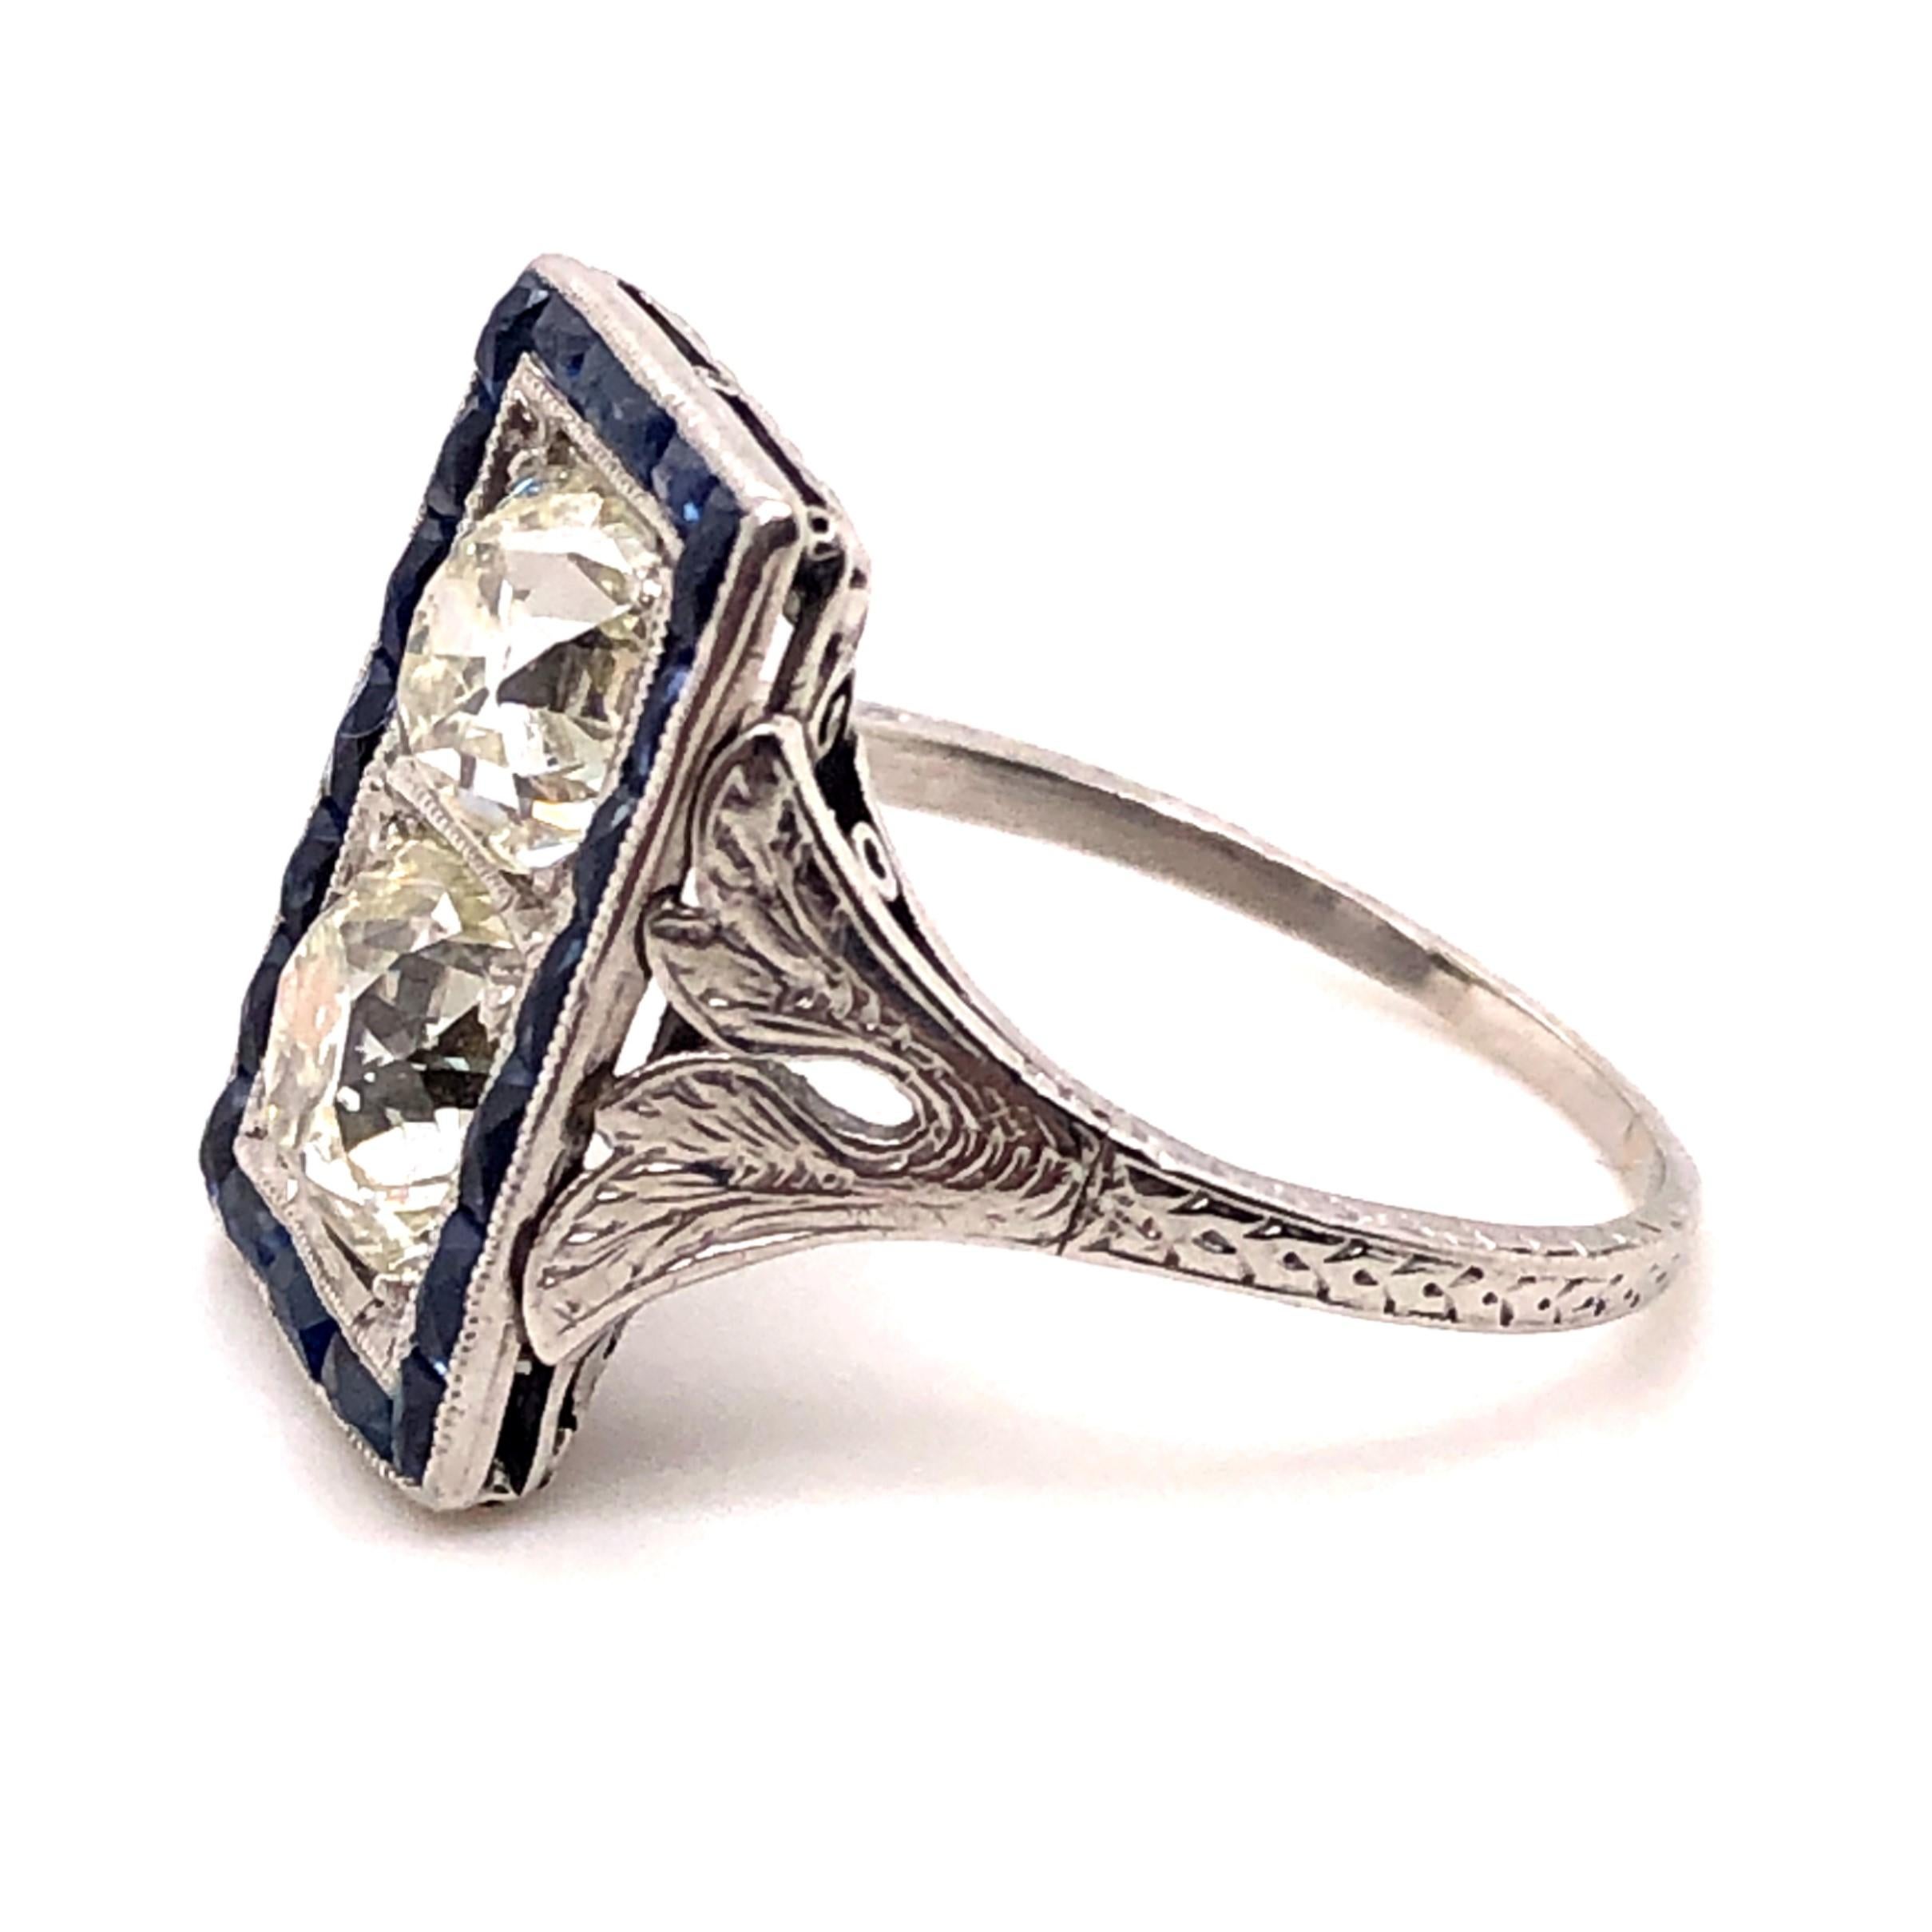 Women's or Men's Art Deco 2.58 Carat Old Mine Cut Diamond and French Cut Sapphire Ring